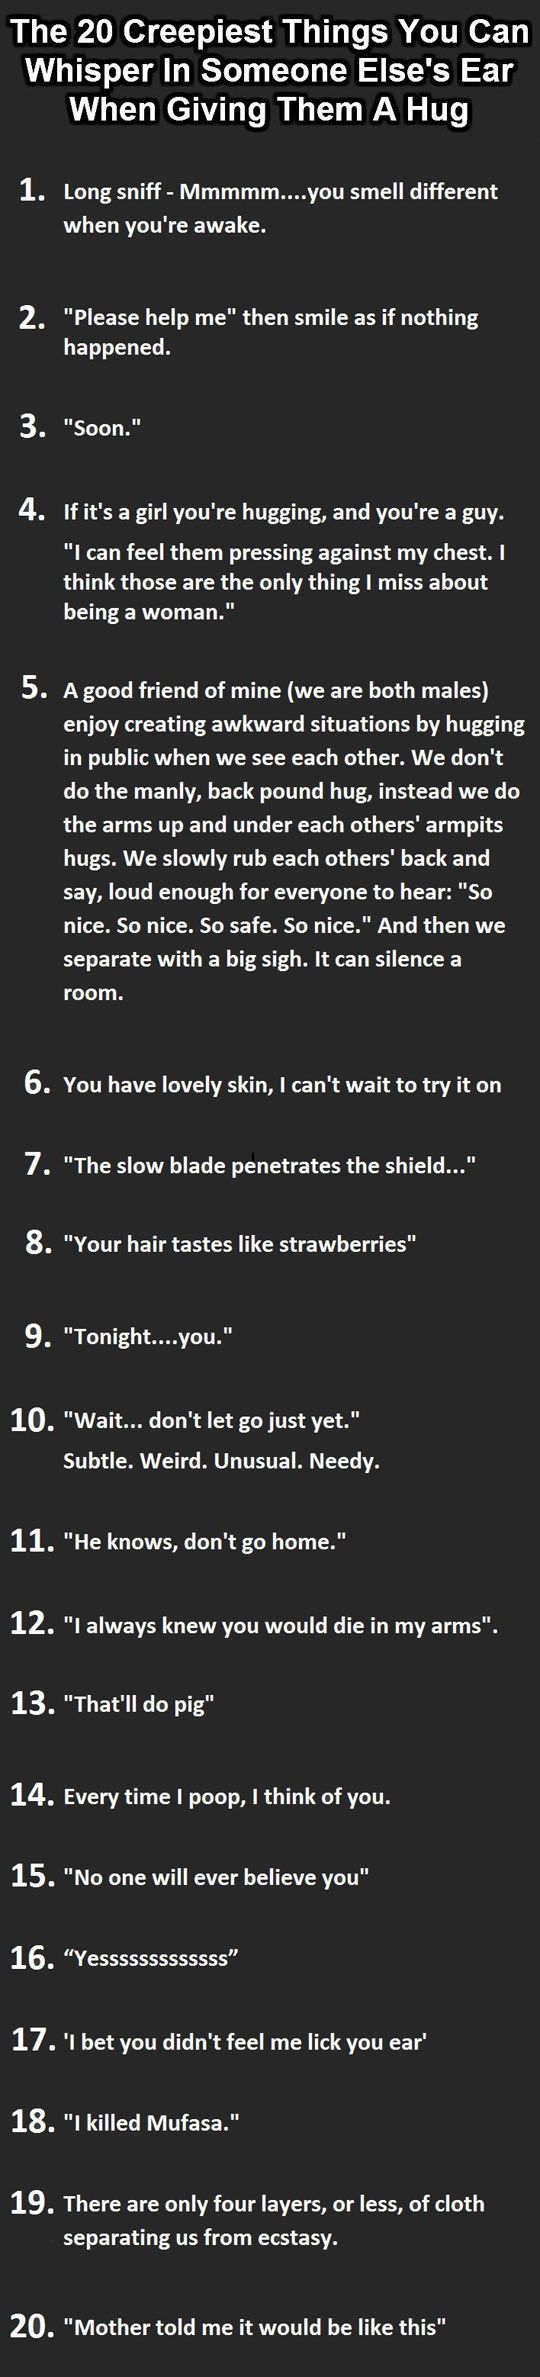 20 creepiest things you can whisper in someone's ear when giving them a hug